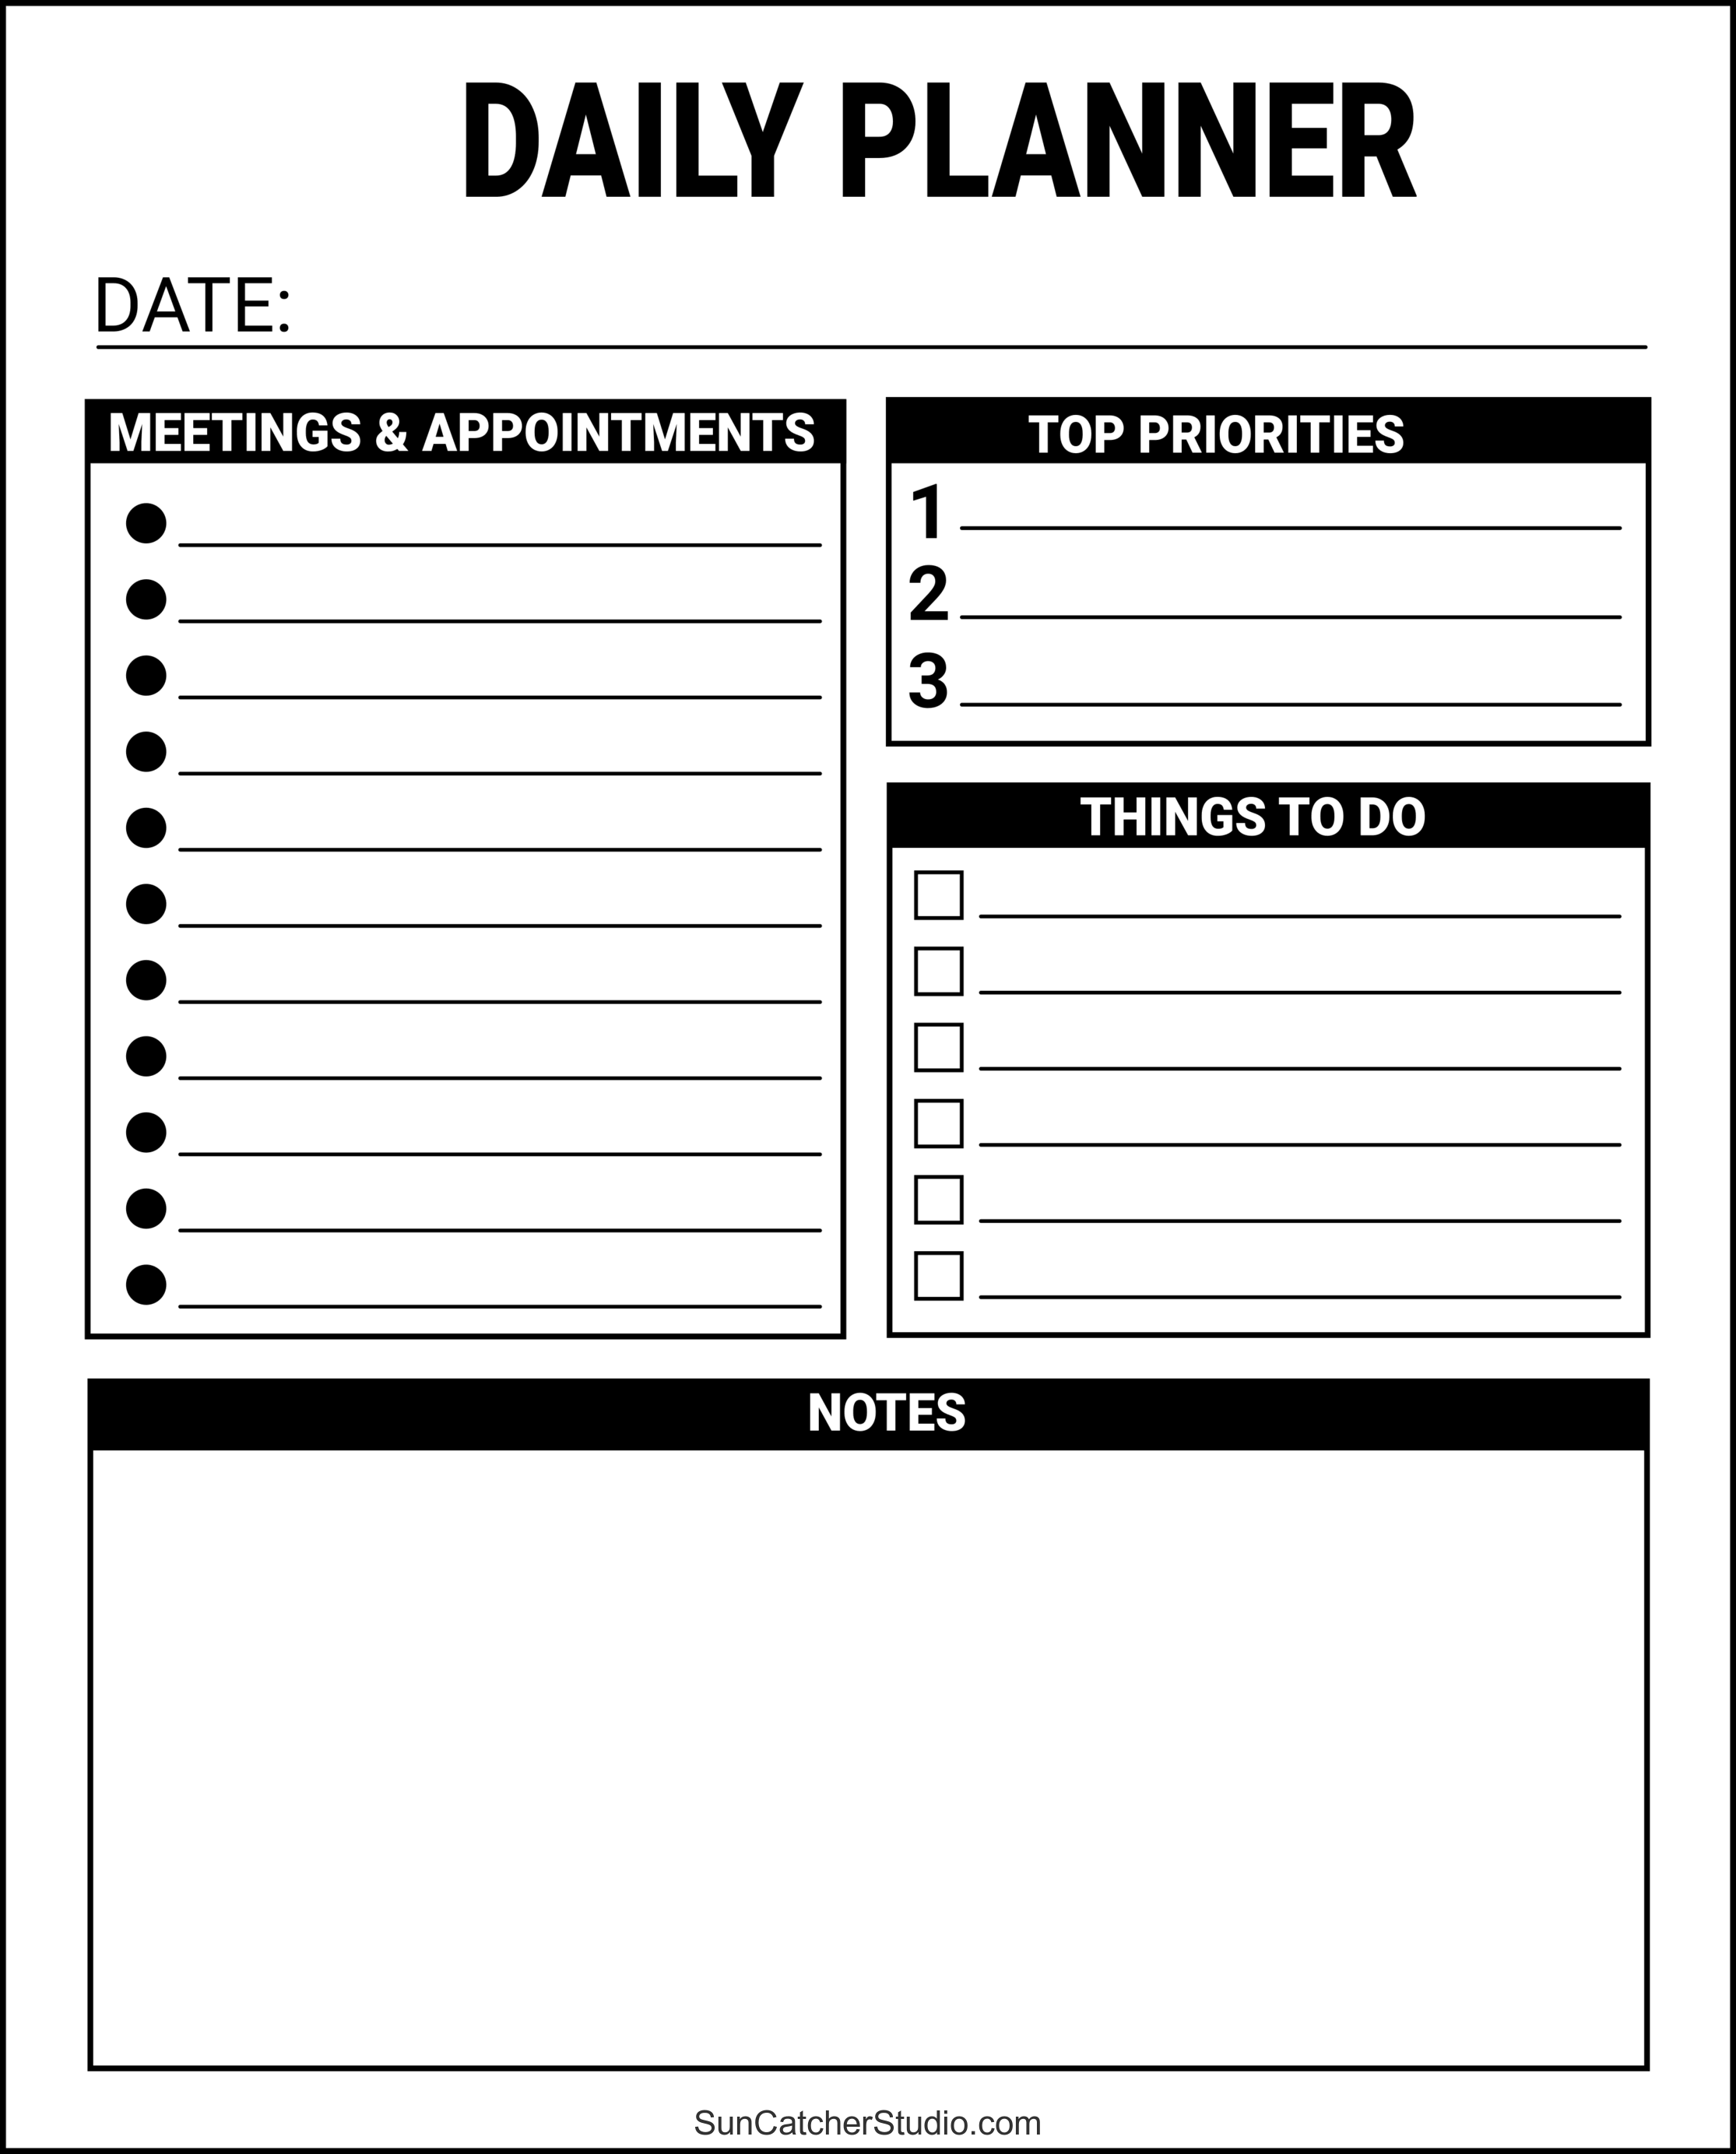 Free Printable Daily Planner Templates PDF format DIY Projects